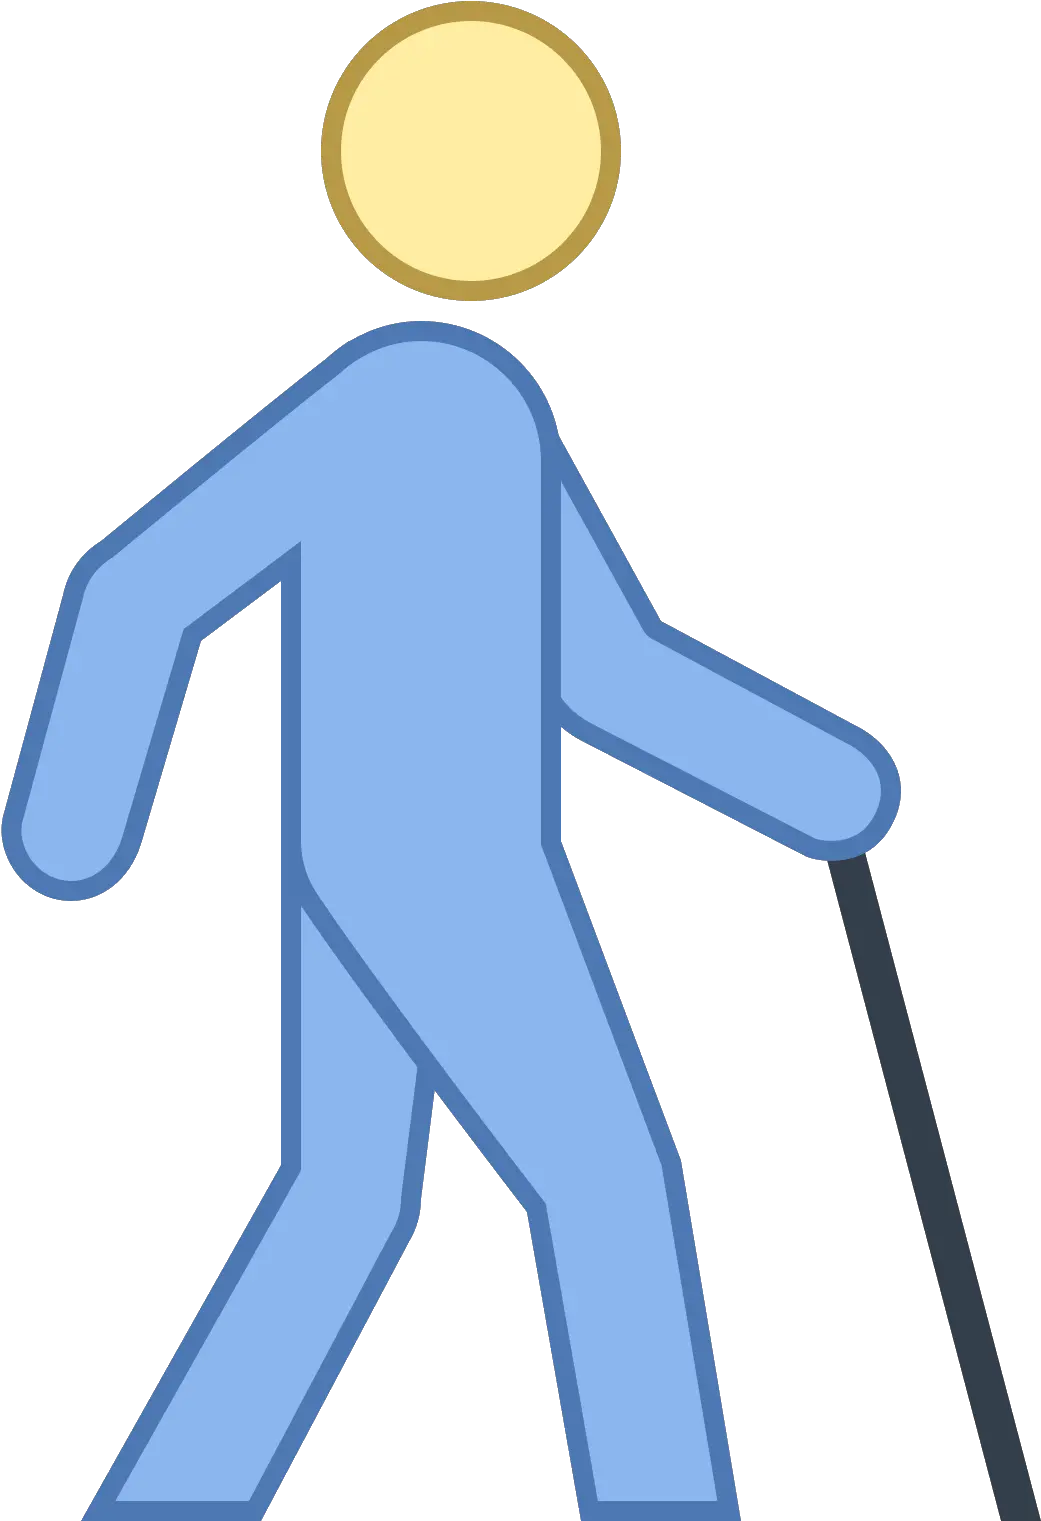 Download Disabled Access Icon Icons8 Png Image With No For Running Access Icon